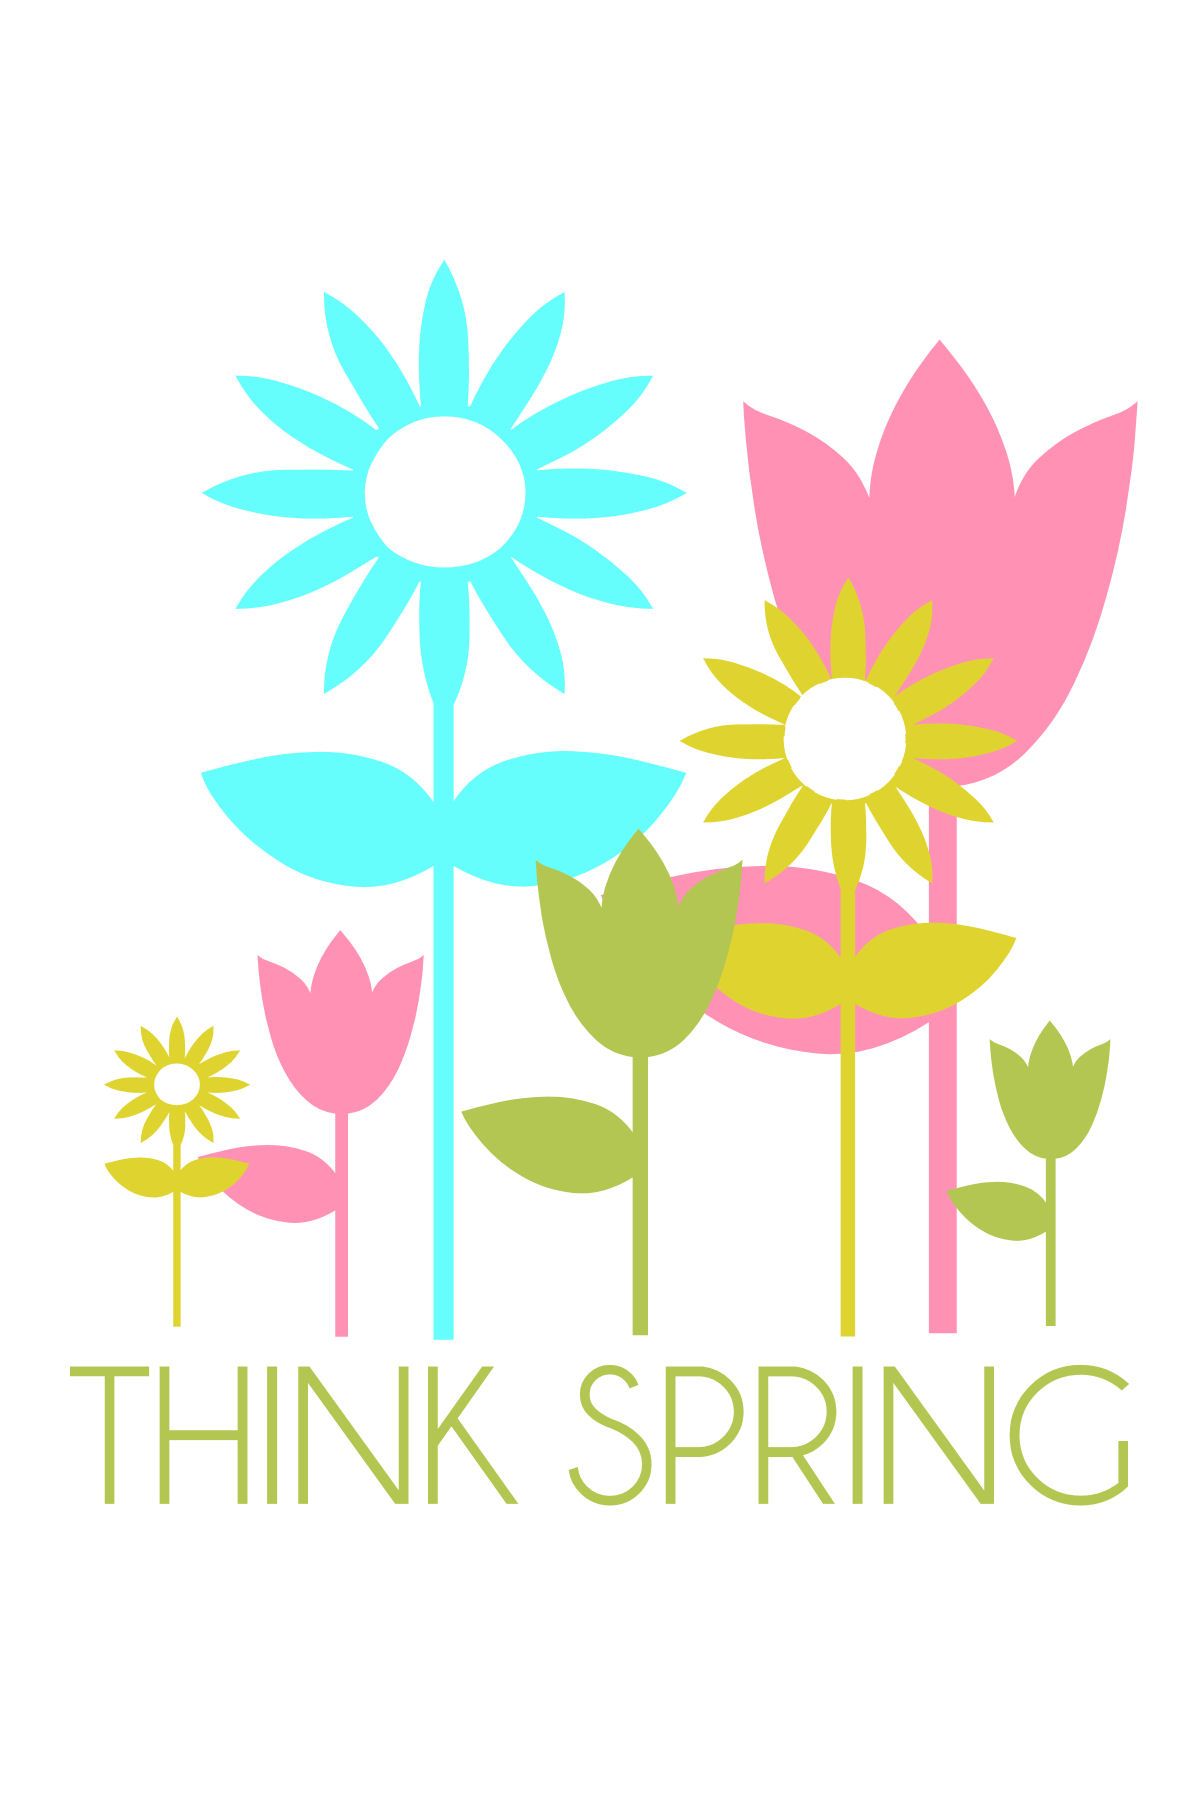 Free Spring Think Clipart, Download Free Clip Art, Free Clip Art